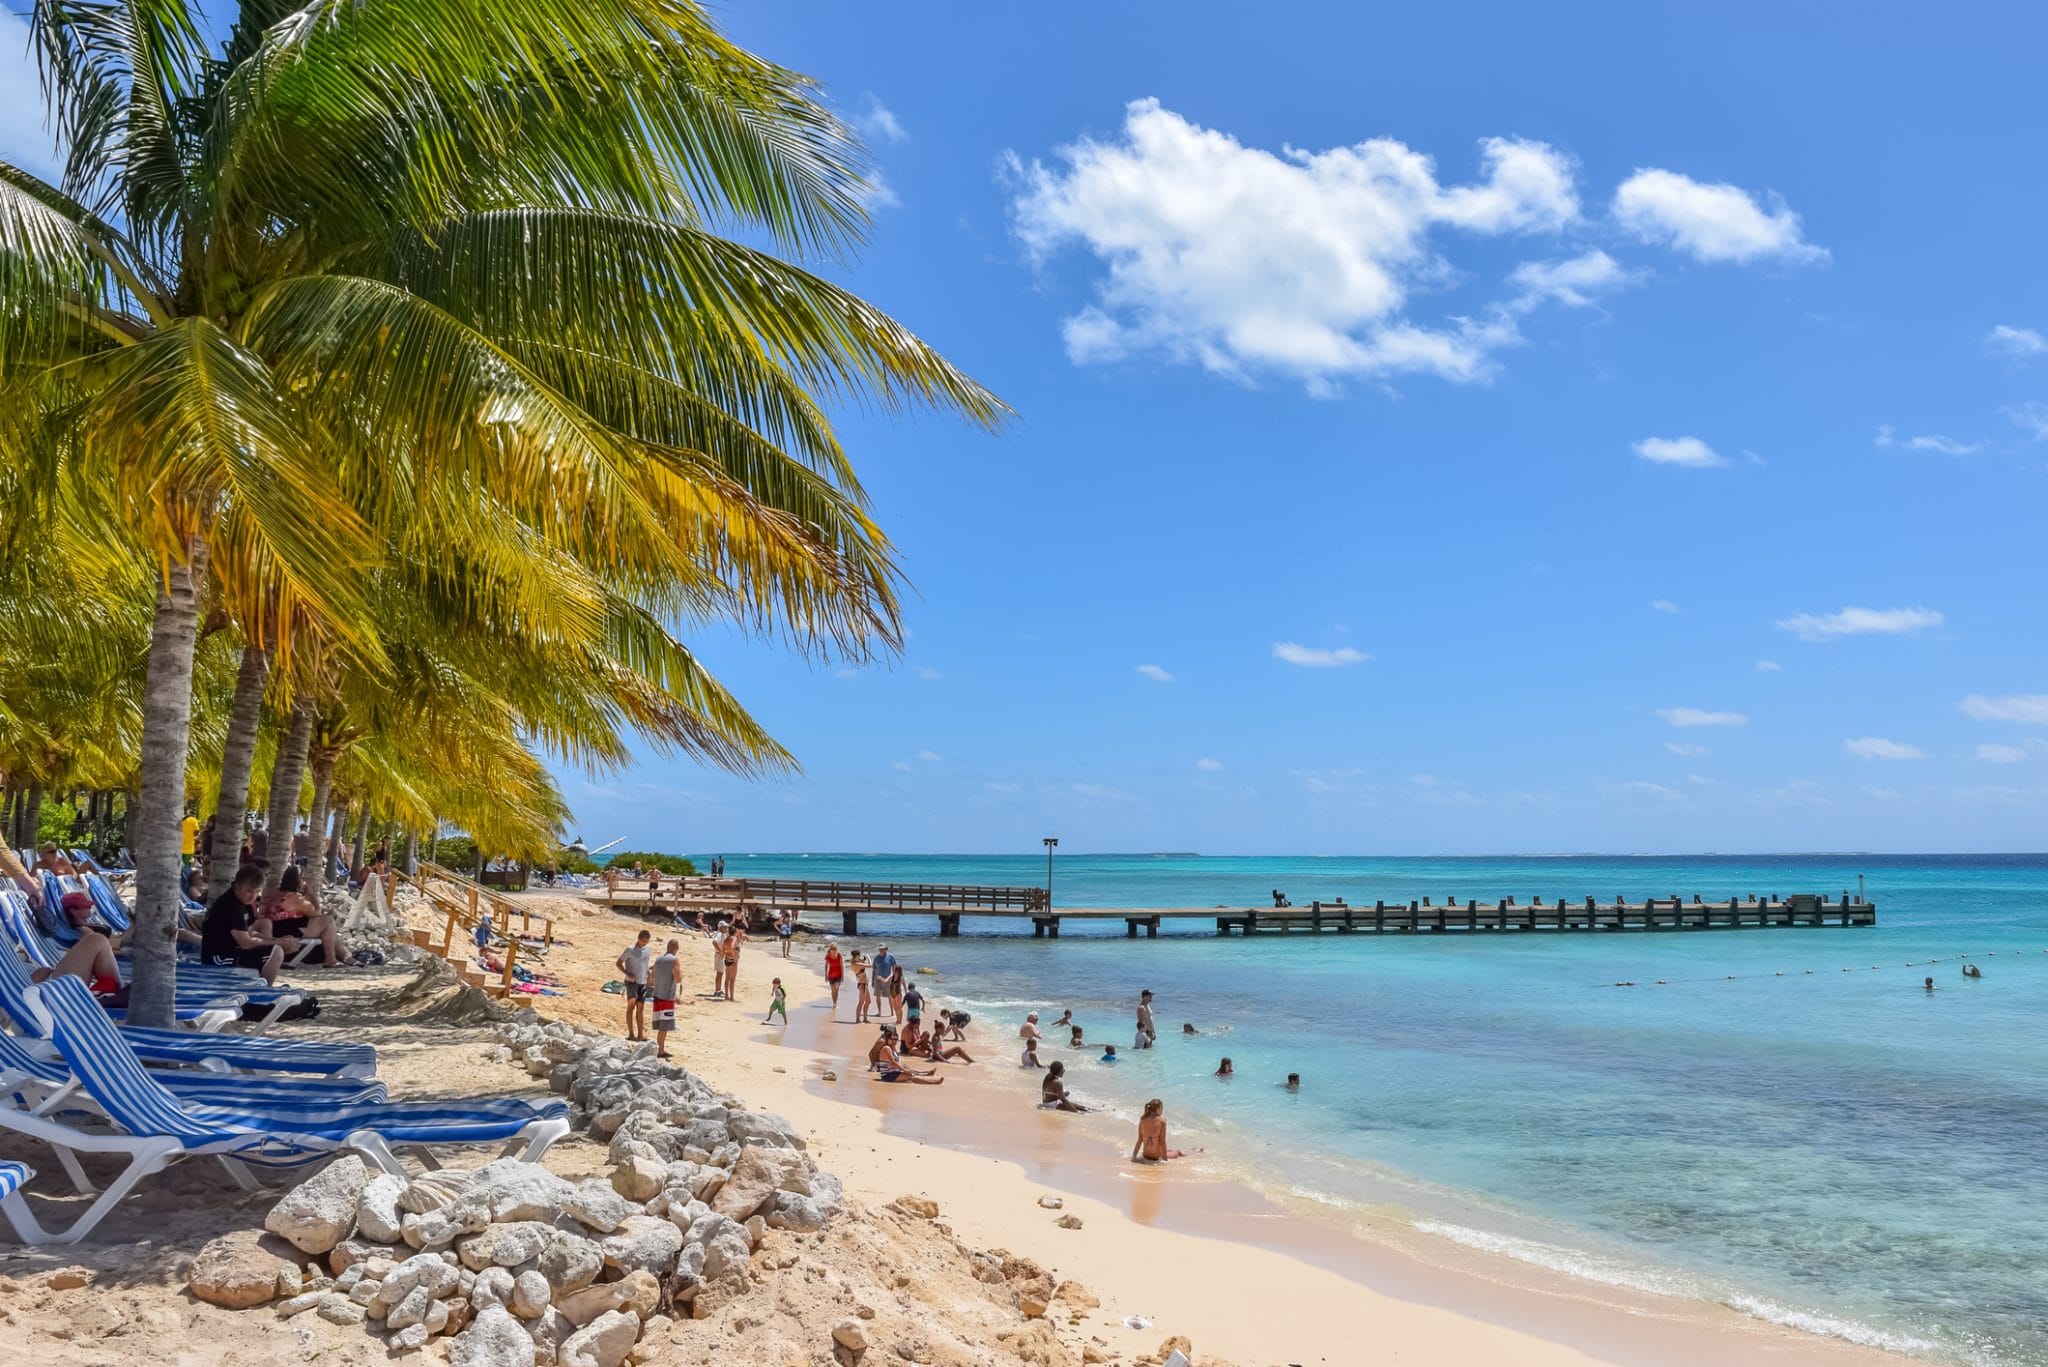 15 Great Things to Do in Grand Turk on Your Cruise